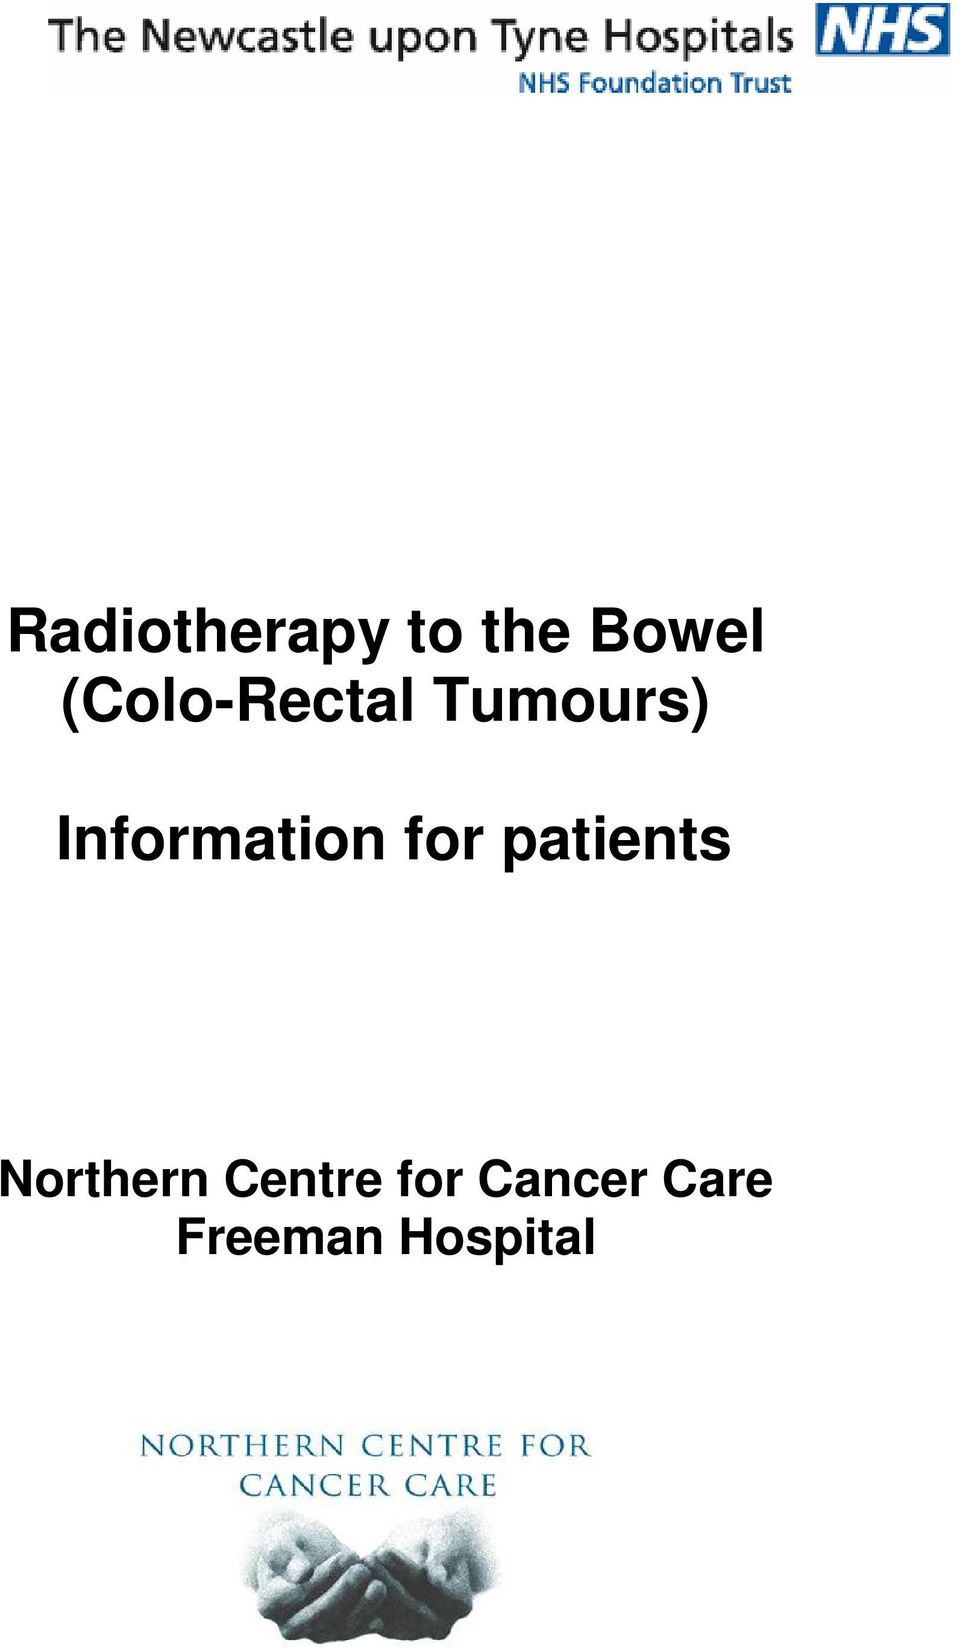 Information for patients